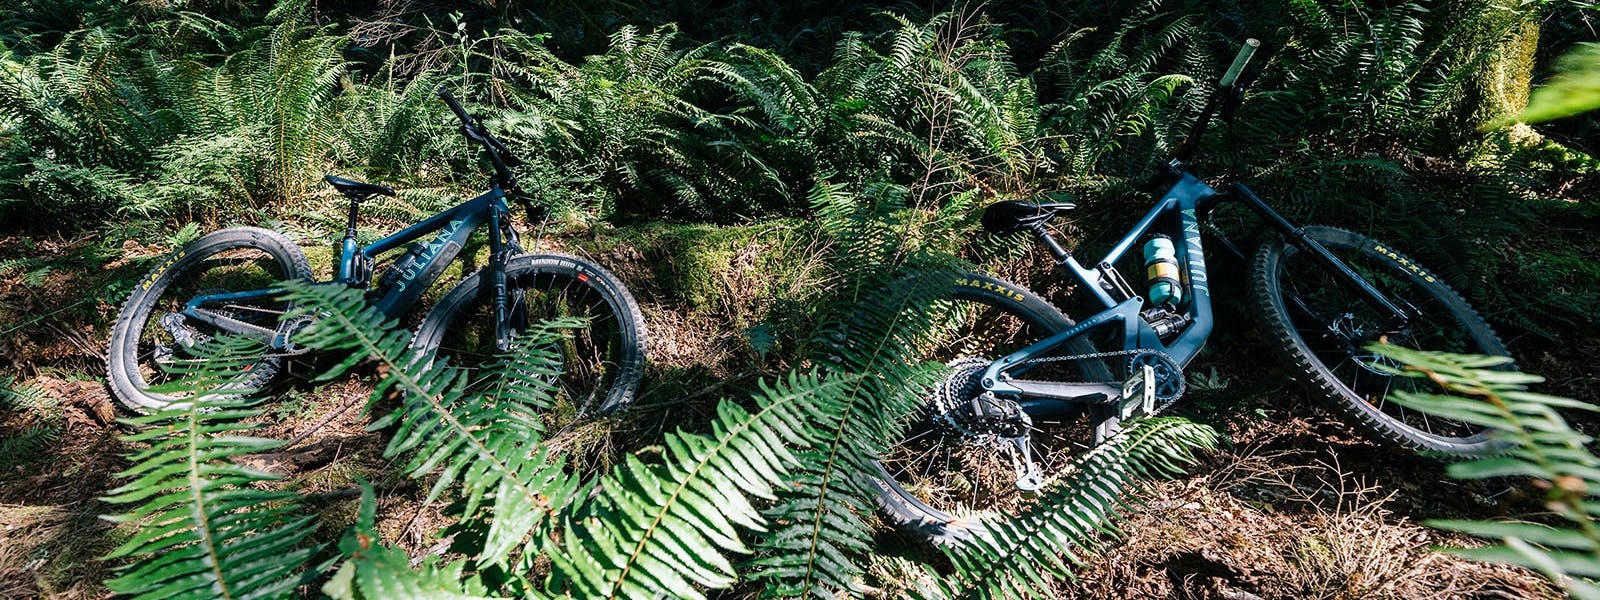 2 Juliana Furtado mountain bikes resting on the ground in the forest